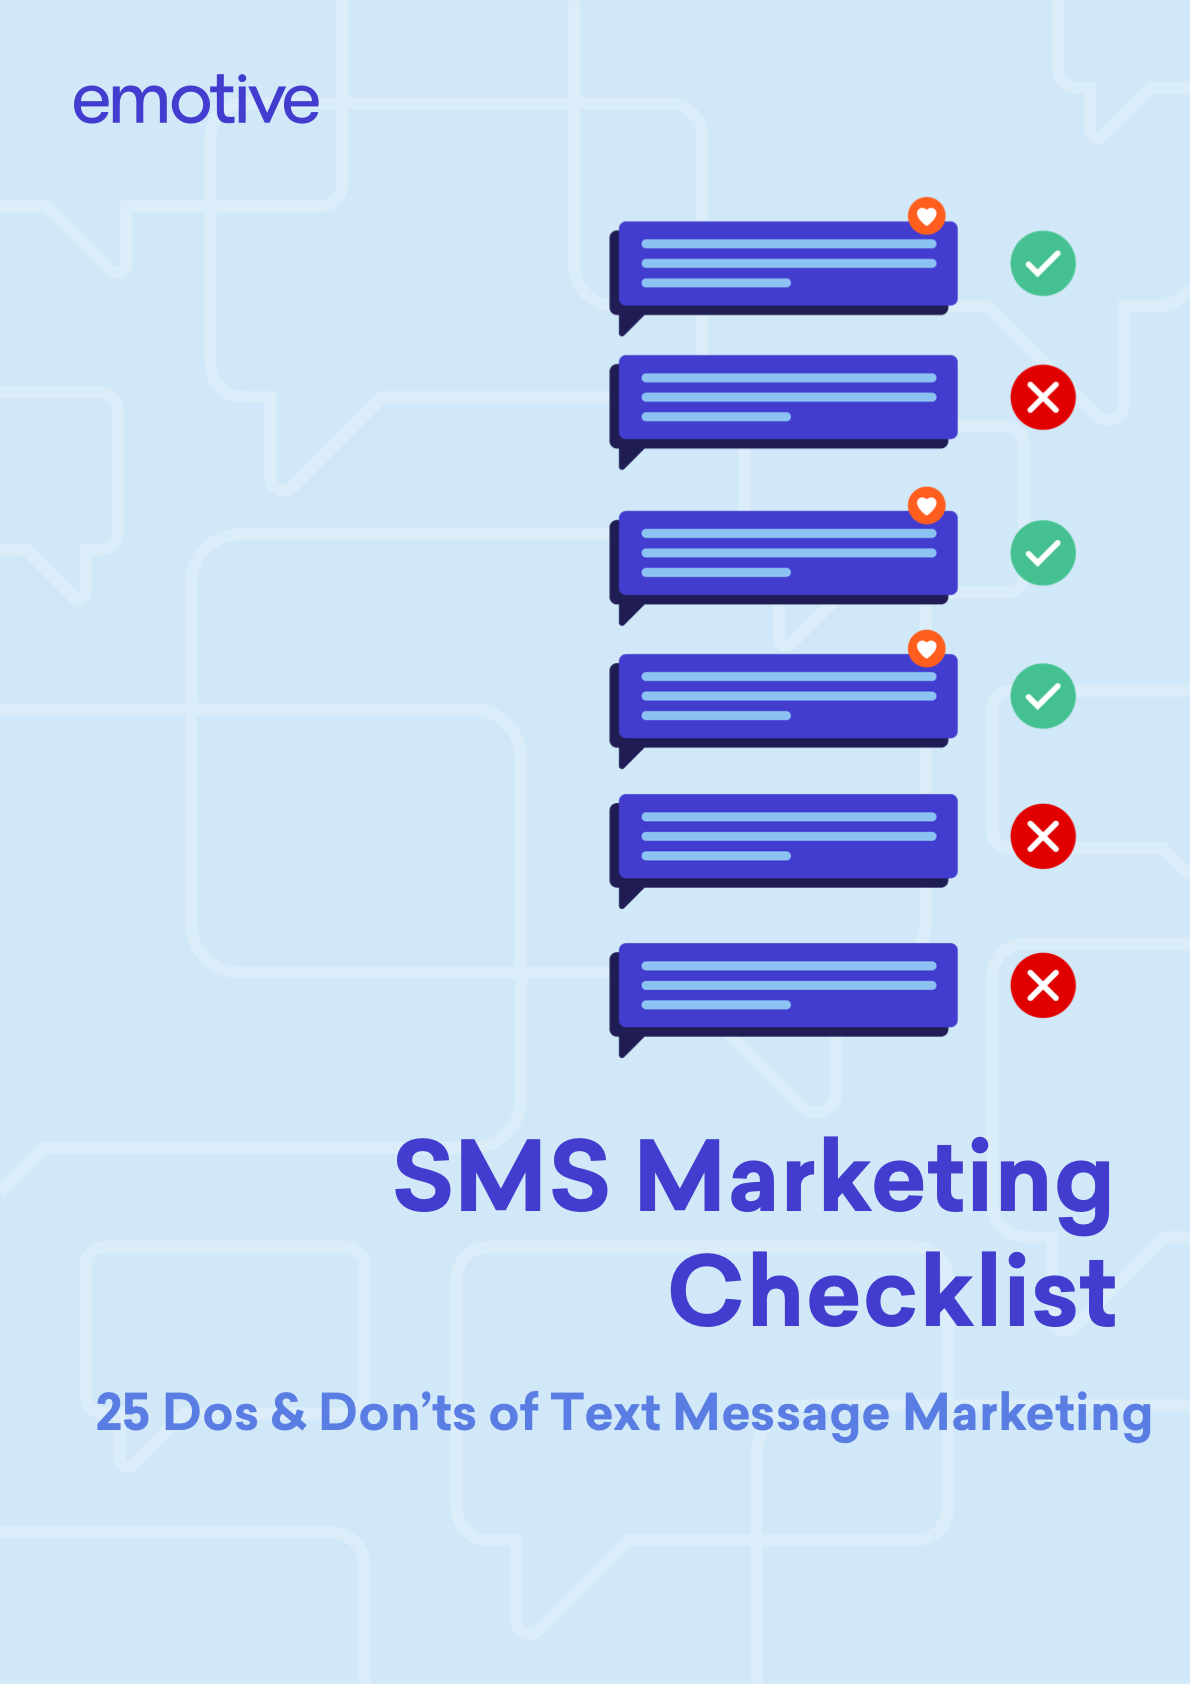 SMS Marketing Checklist: 25 Dos & Don'ts of Text Message Marketing Featured Image